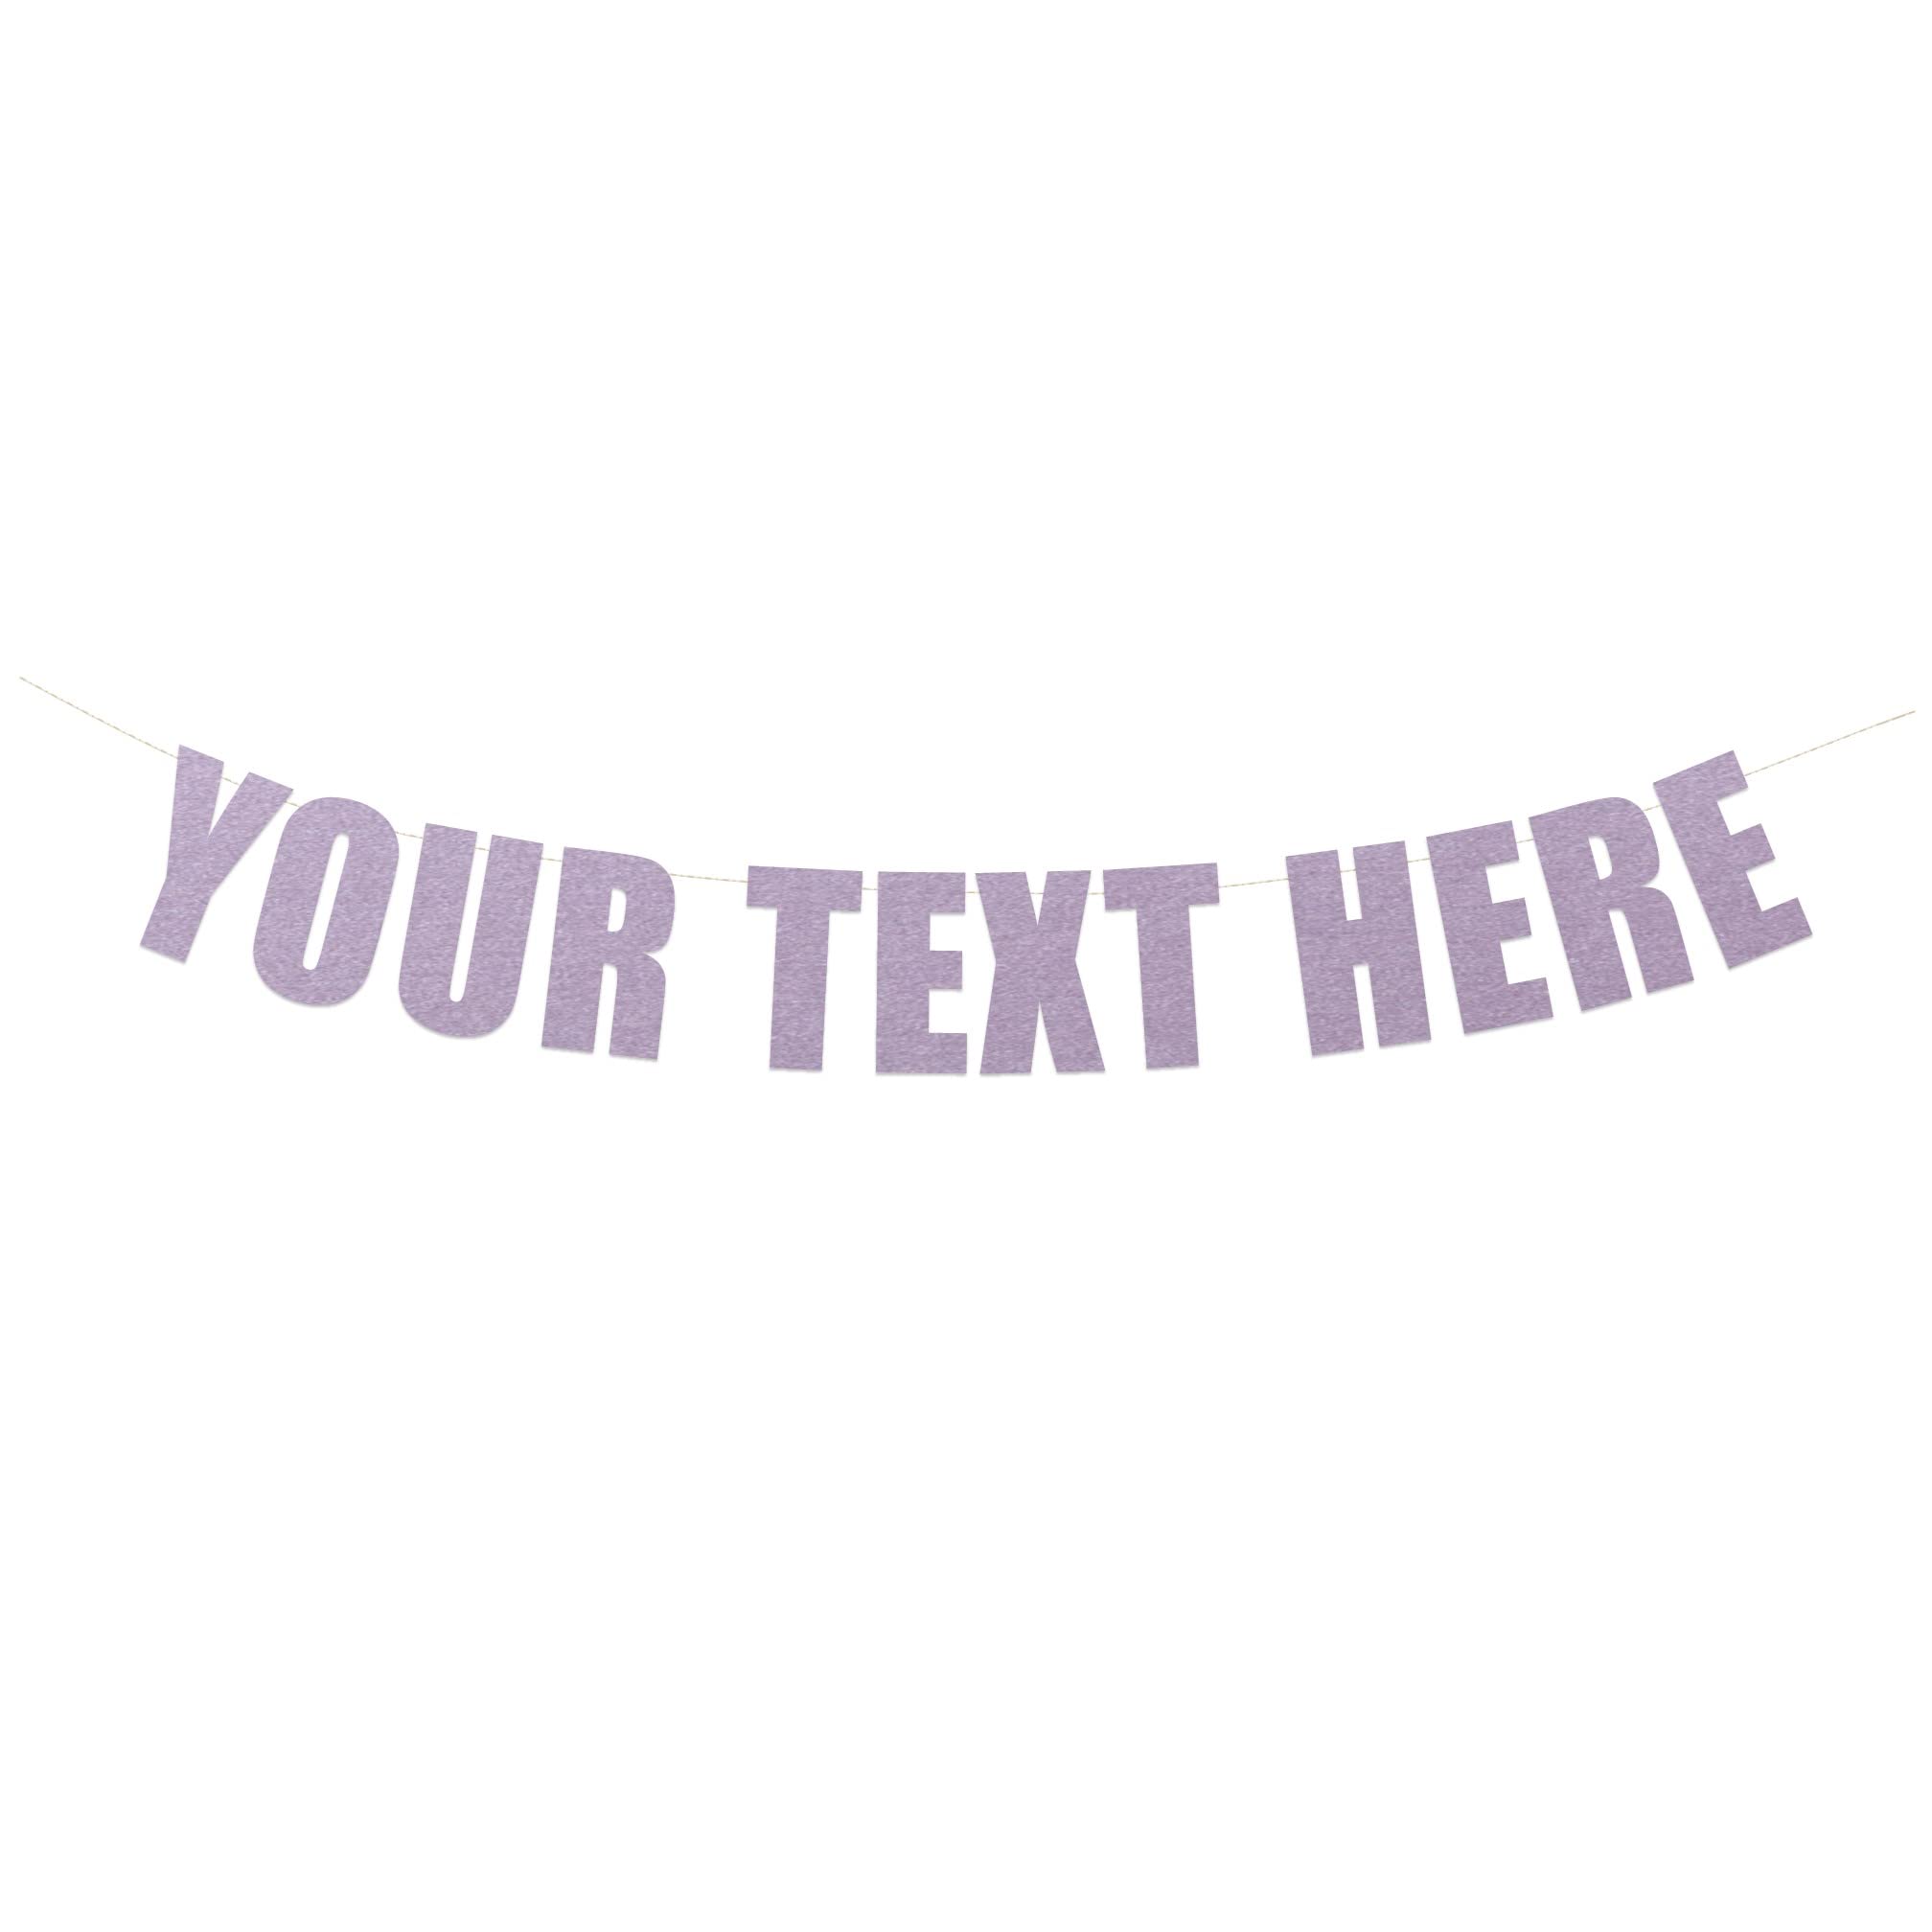 Your Text Here banner - Funny Rude Customize Your Party Banner Signs | Custom Text/Phrase Banner | Make Your Own Banner Sign | StringItBanners (Lavender Metallic)